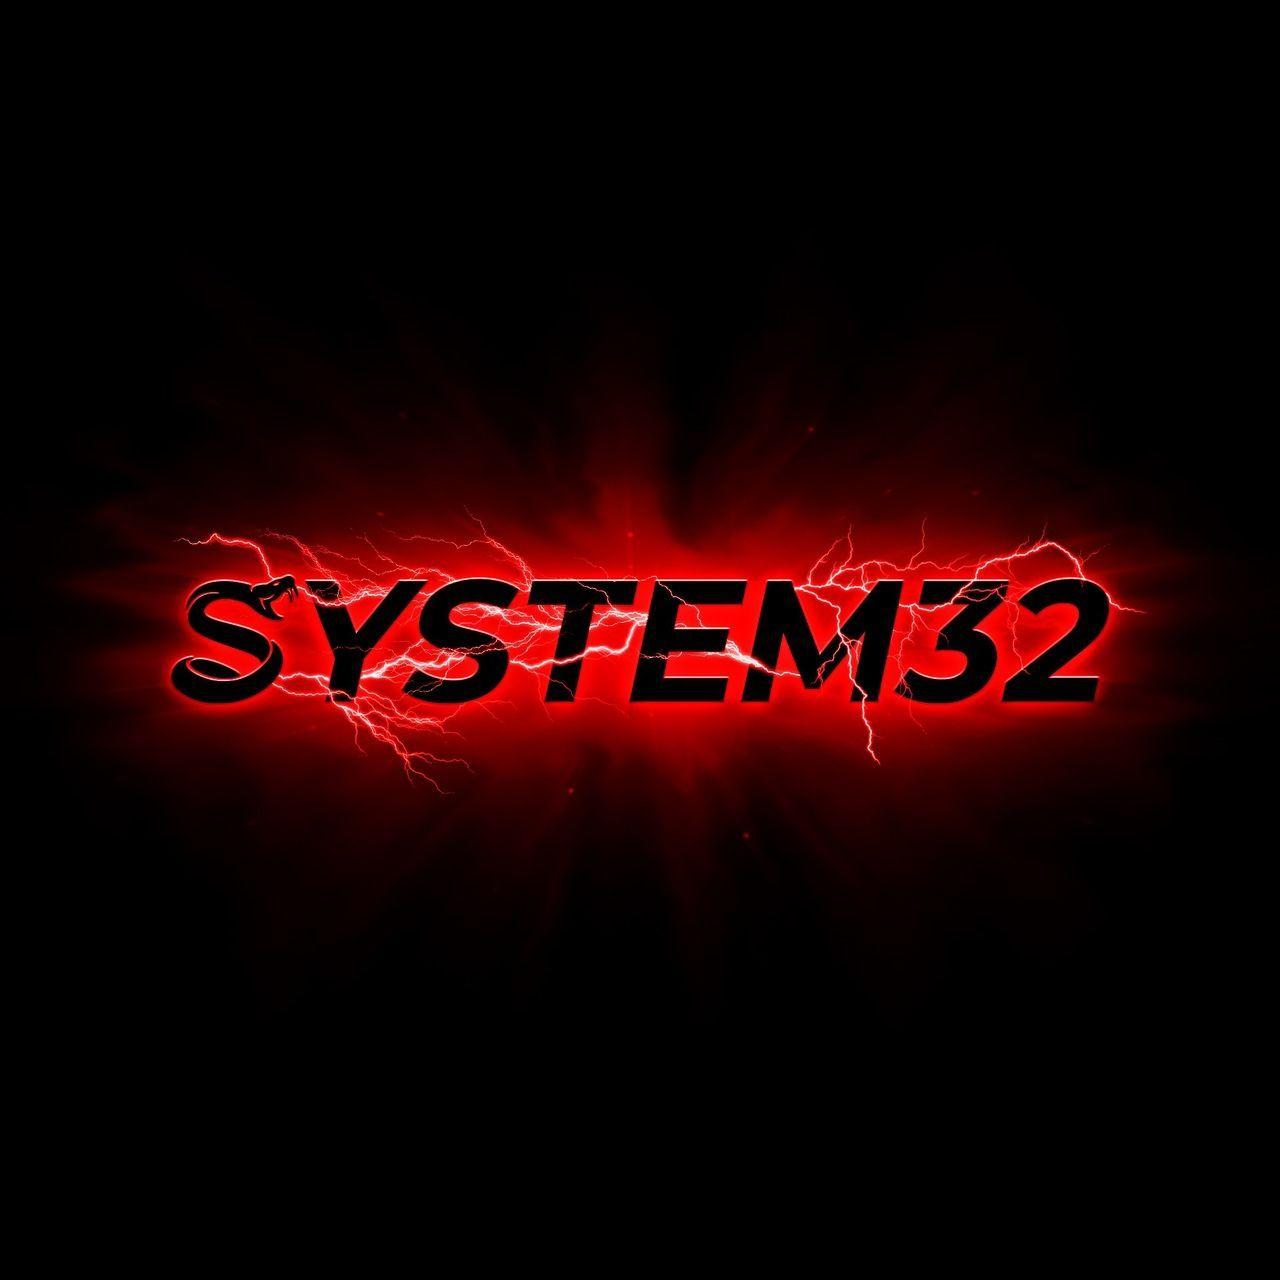 Player System32_off avatar